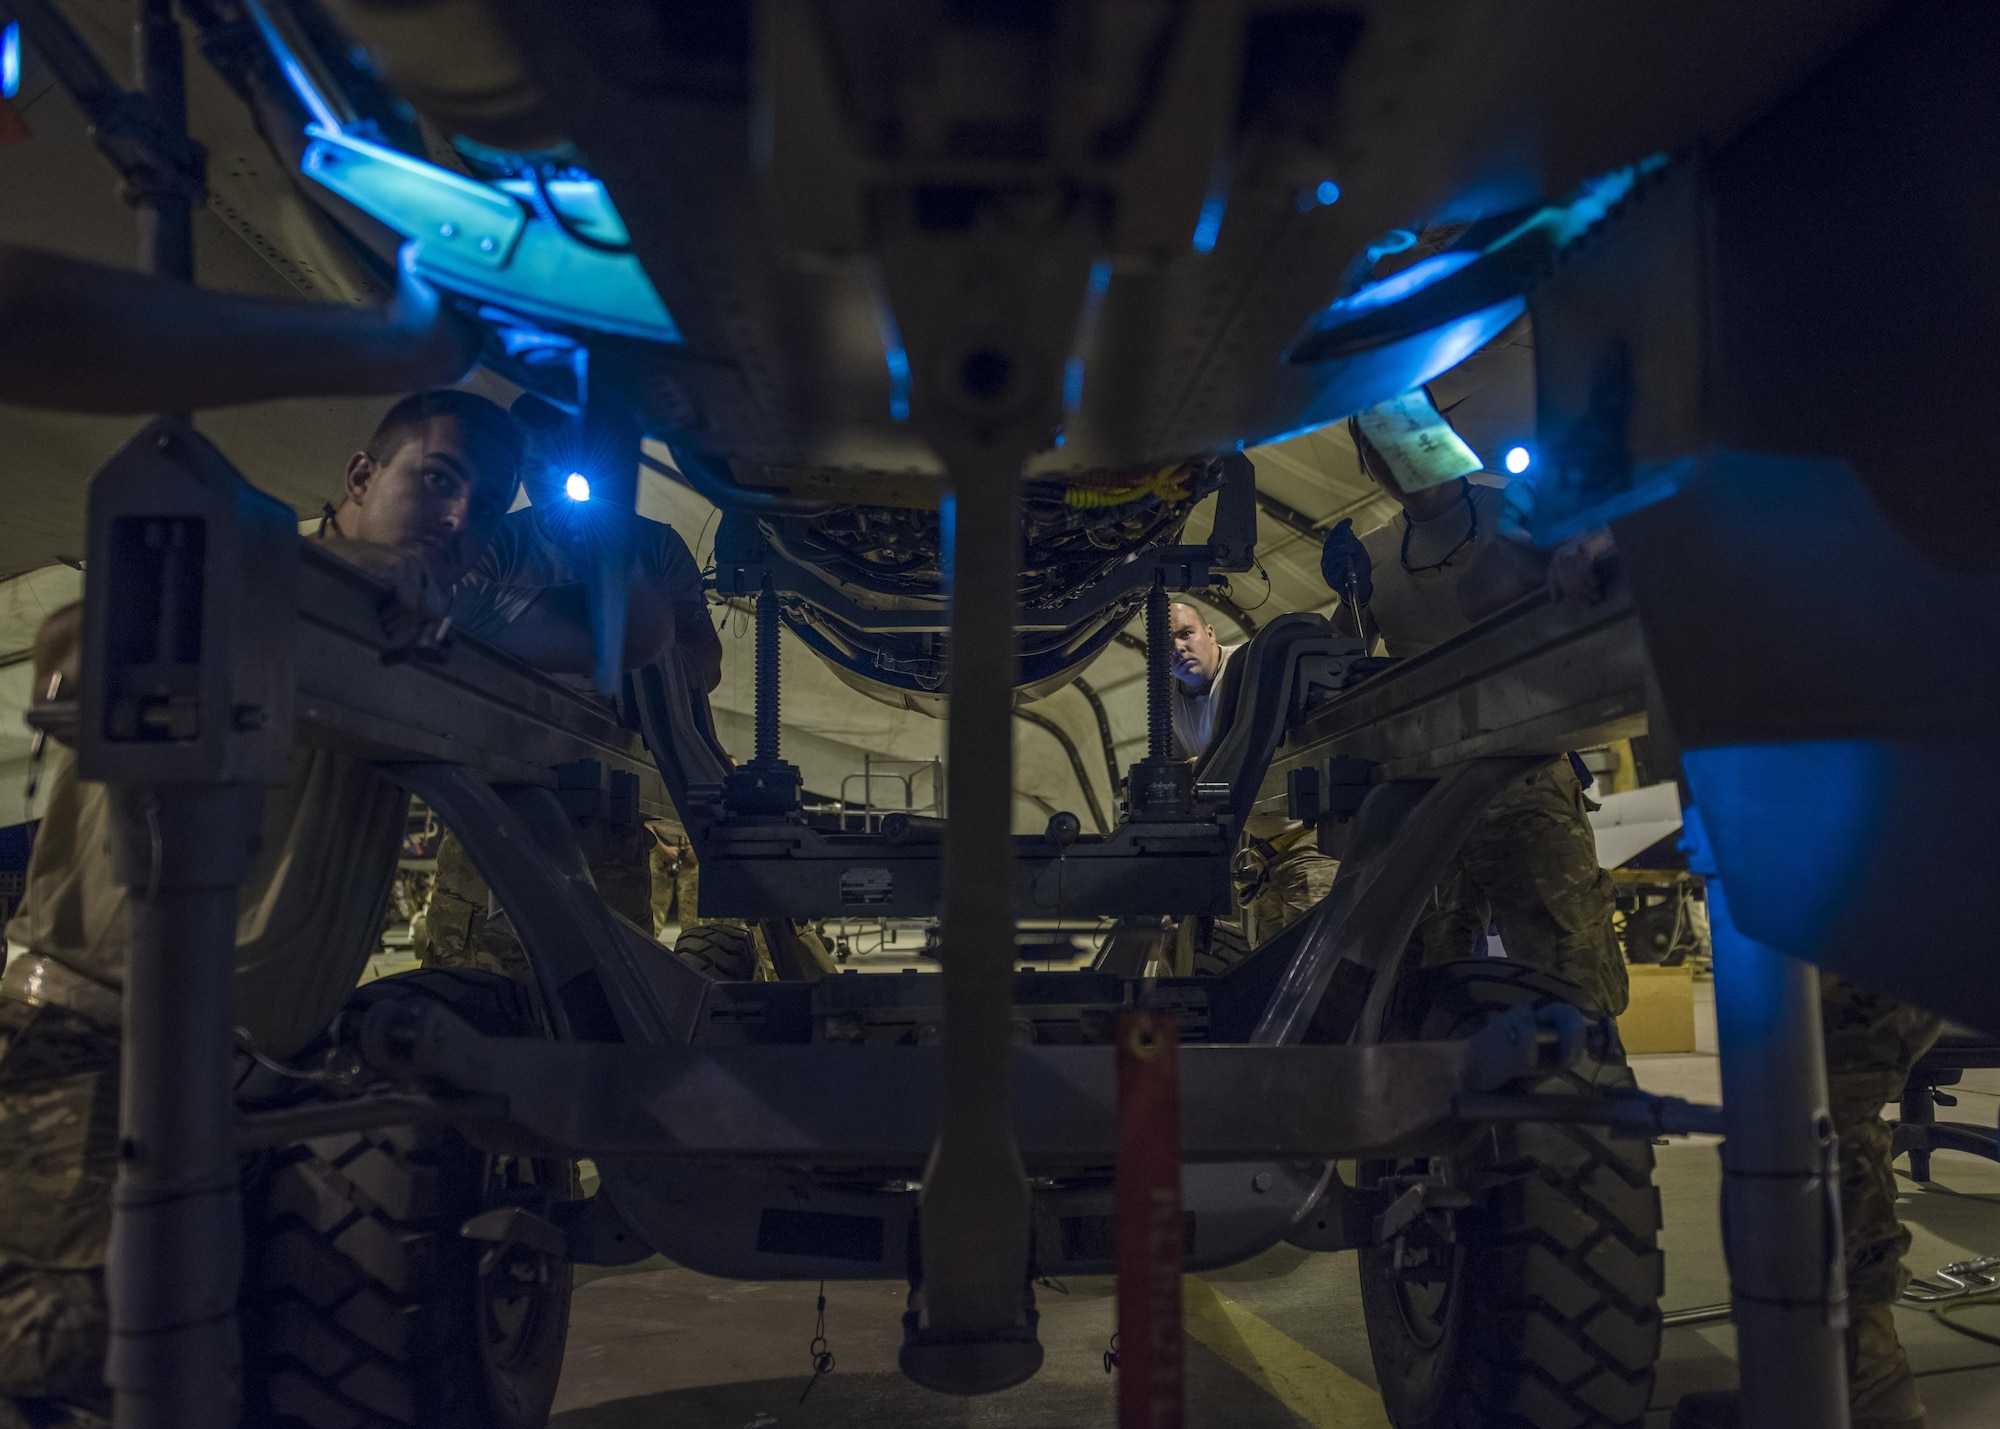 455th Expeditionary Aircraft Maintenance Squadron tactical aircraft maintenance technicians otherwise known as crew chiefs, install an F-16C Fighting Falcon engine, Bagram Airfield, Afghanistan, Aug. 9, 2016. Crew Chiefs conduct day-to-day maintenance, including end-of-runway, postflight, preflight, thru-flight, special inspections and phase inspections. They are also responsible for diagnosing aircraft malfunctions and replacing components. (U.S. Air Force photo by Senior Airman Justyn M. Freeman)